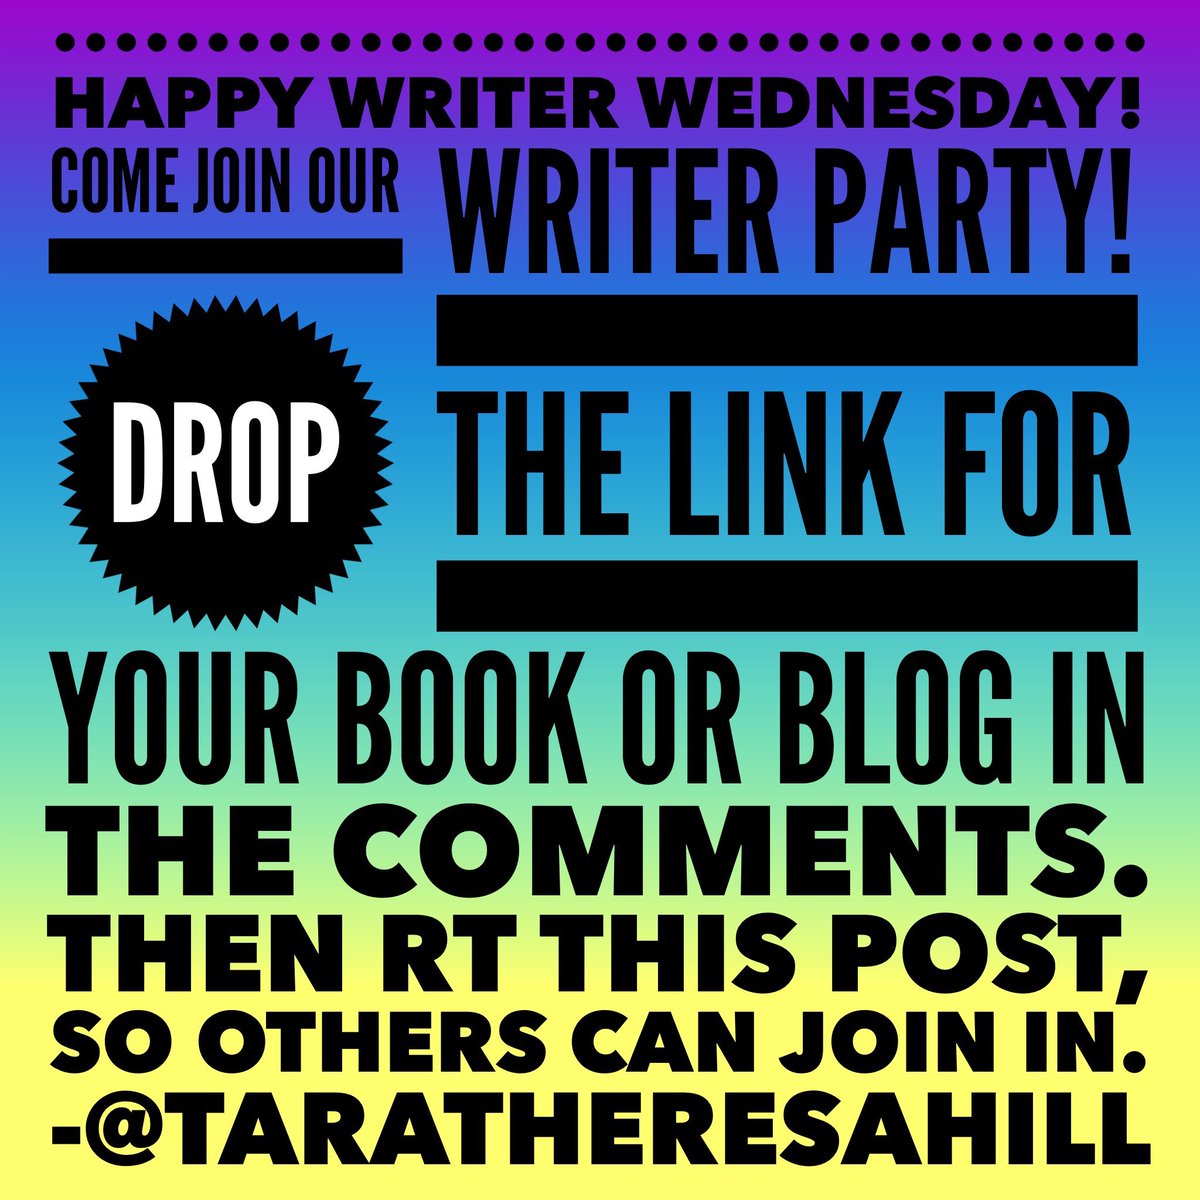 Happy  #WriterWed! Please share your works, author websites, and links in the comments below and RT this post so others can join in.  #WritingCommunity  #writerslift  #books  #blogs  #vlogs   #WriterWednesday  #writerparty  #writerslife  #writers  #authors  #indieauthors  #readingcommunity